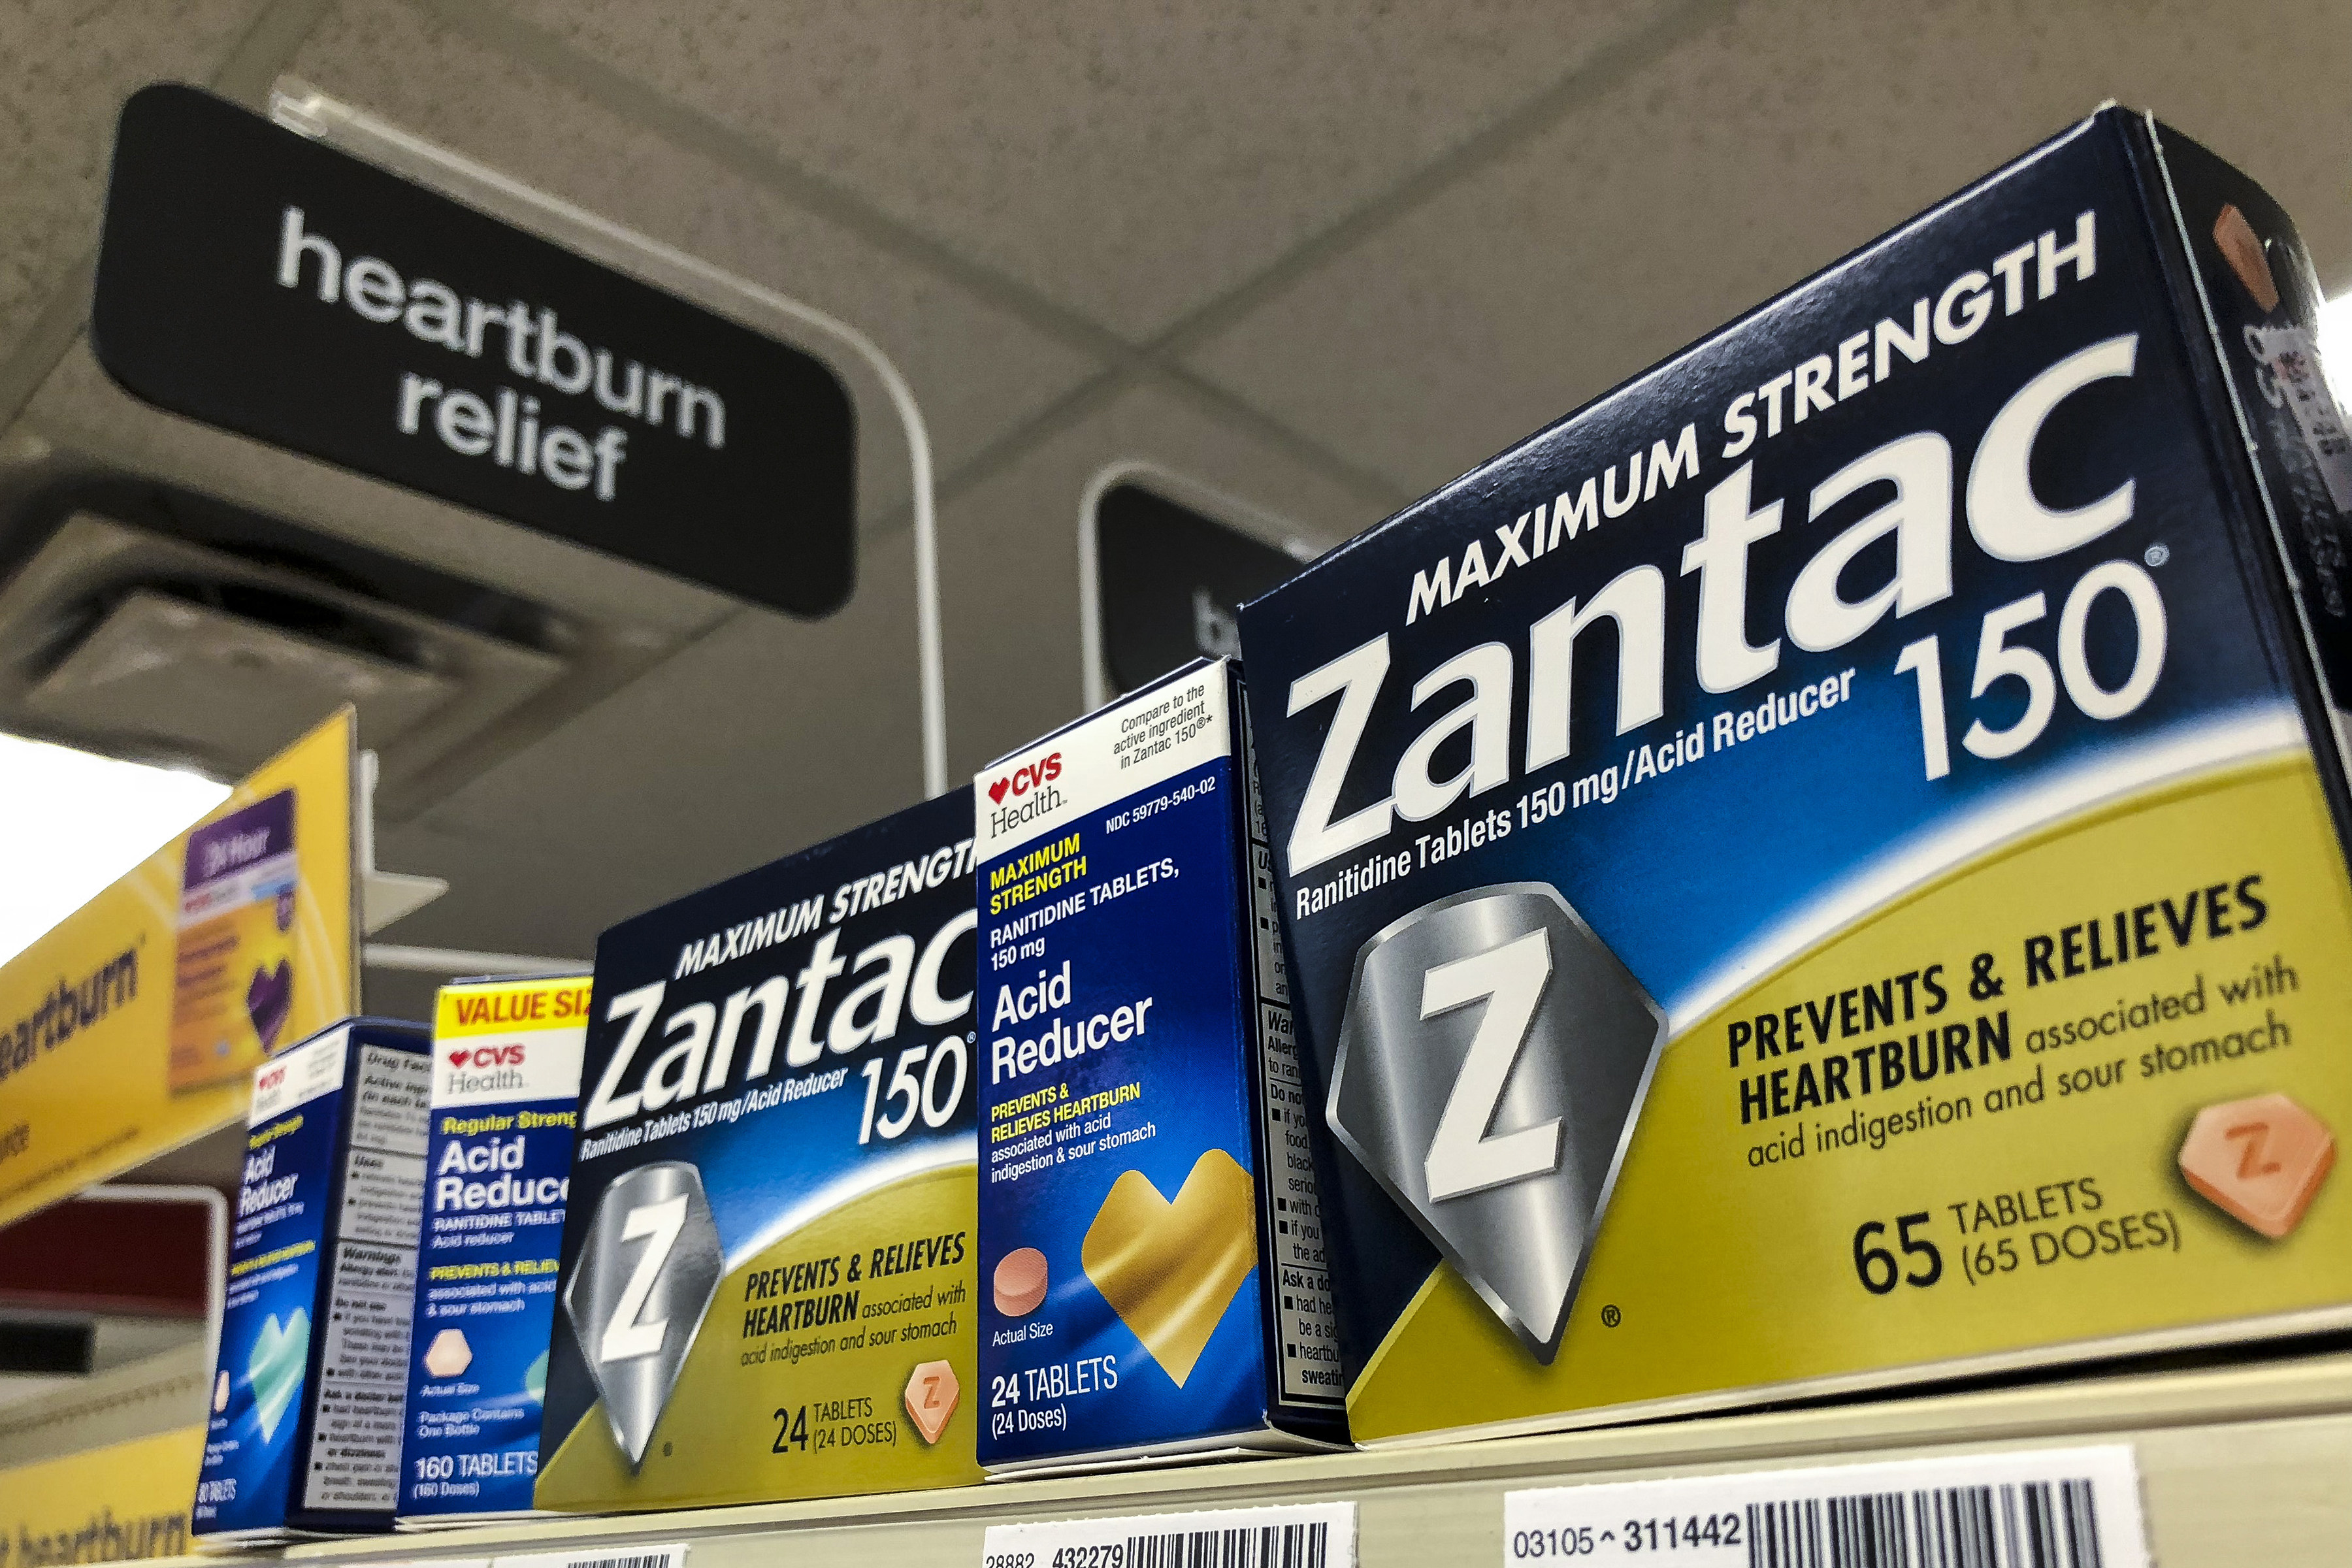 Packages of heartburn medication Zantac. The FDA recently announced that it has found small amounts of a probable carcinogen in versions of Zantac and other forms of ranitidine. Photo: Getty Images / TNS